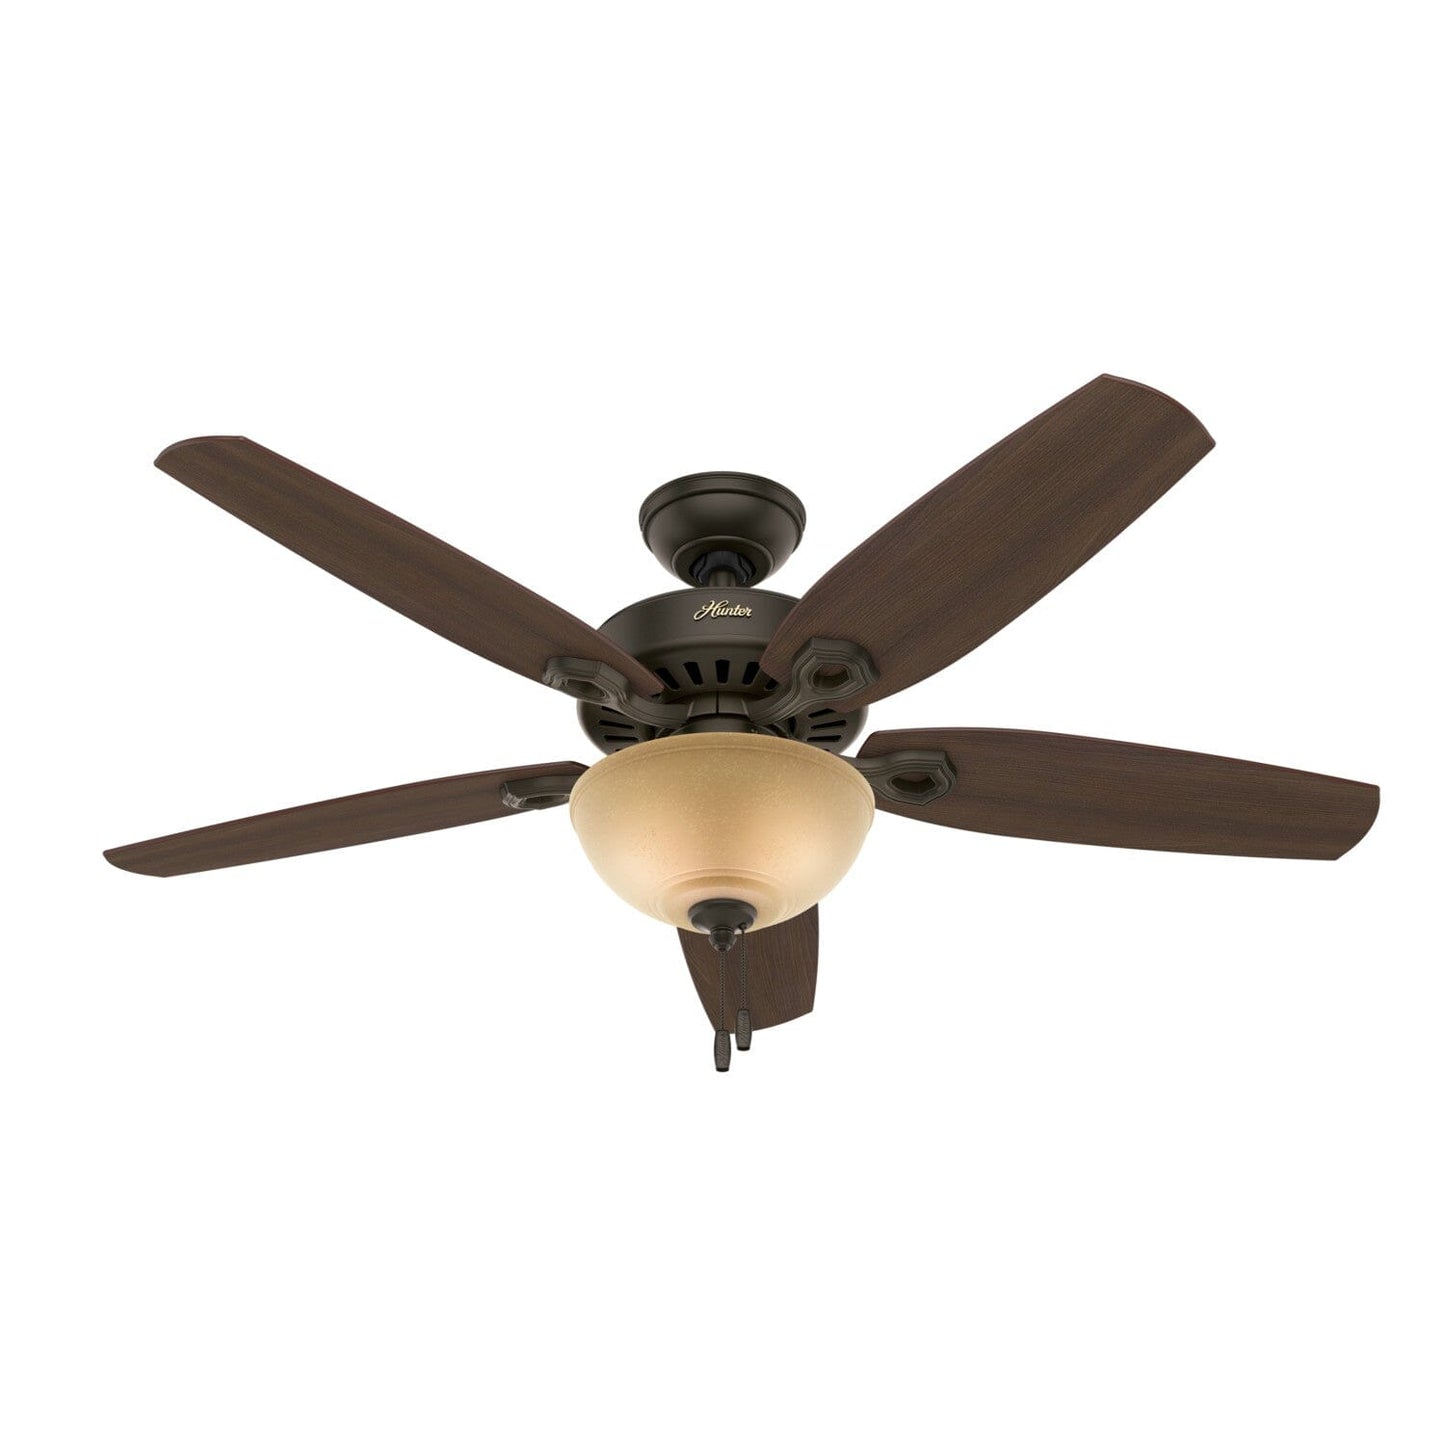 Builder Deluxe Toffee with Light 52 inch Ceiling Fans Hunter New Bronze - Brazilian Cherry 